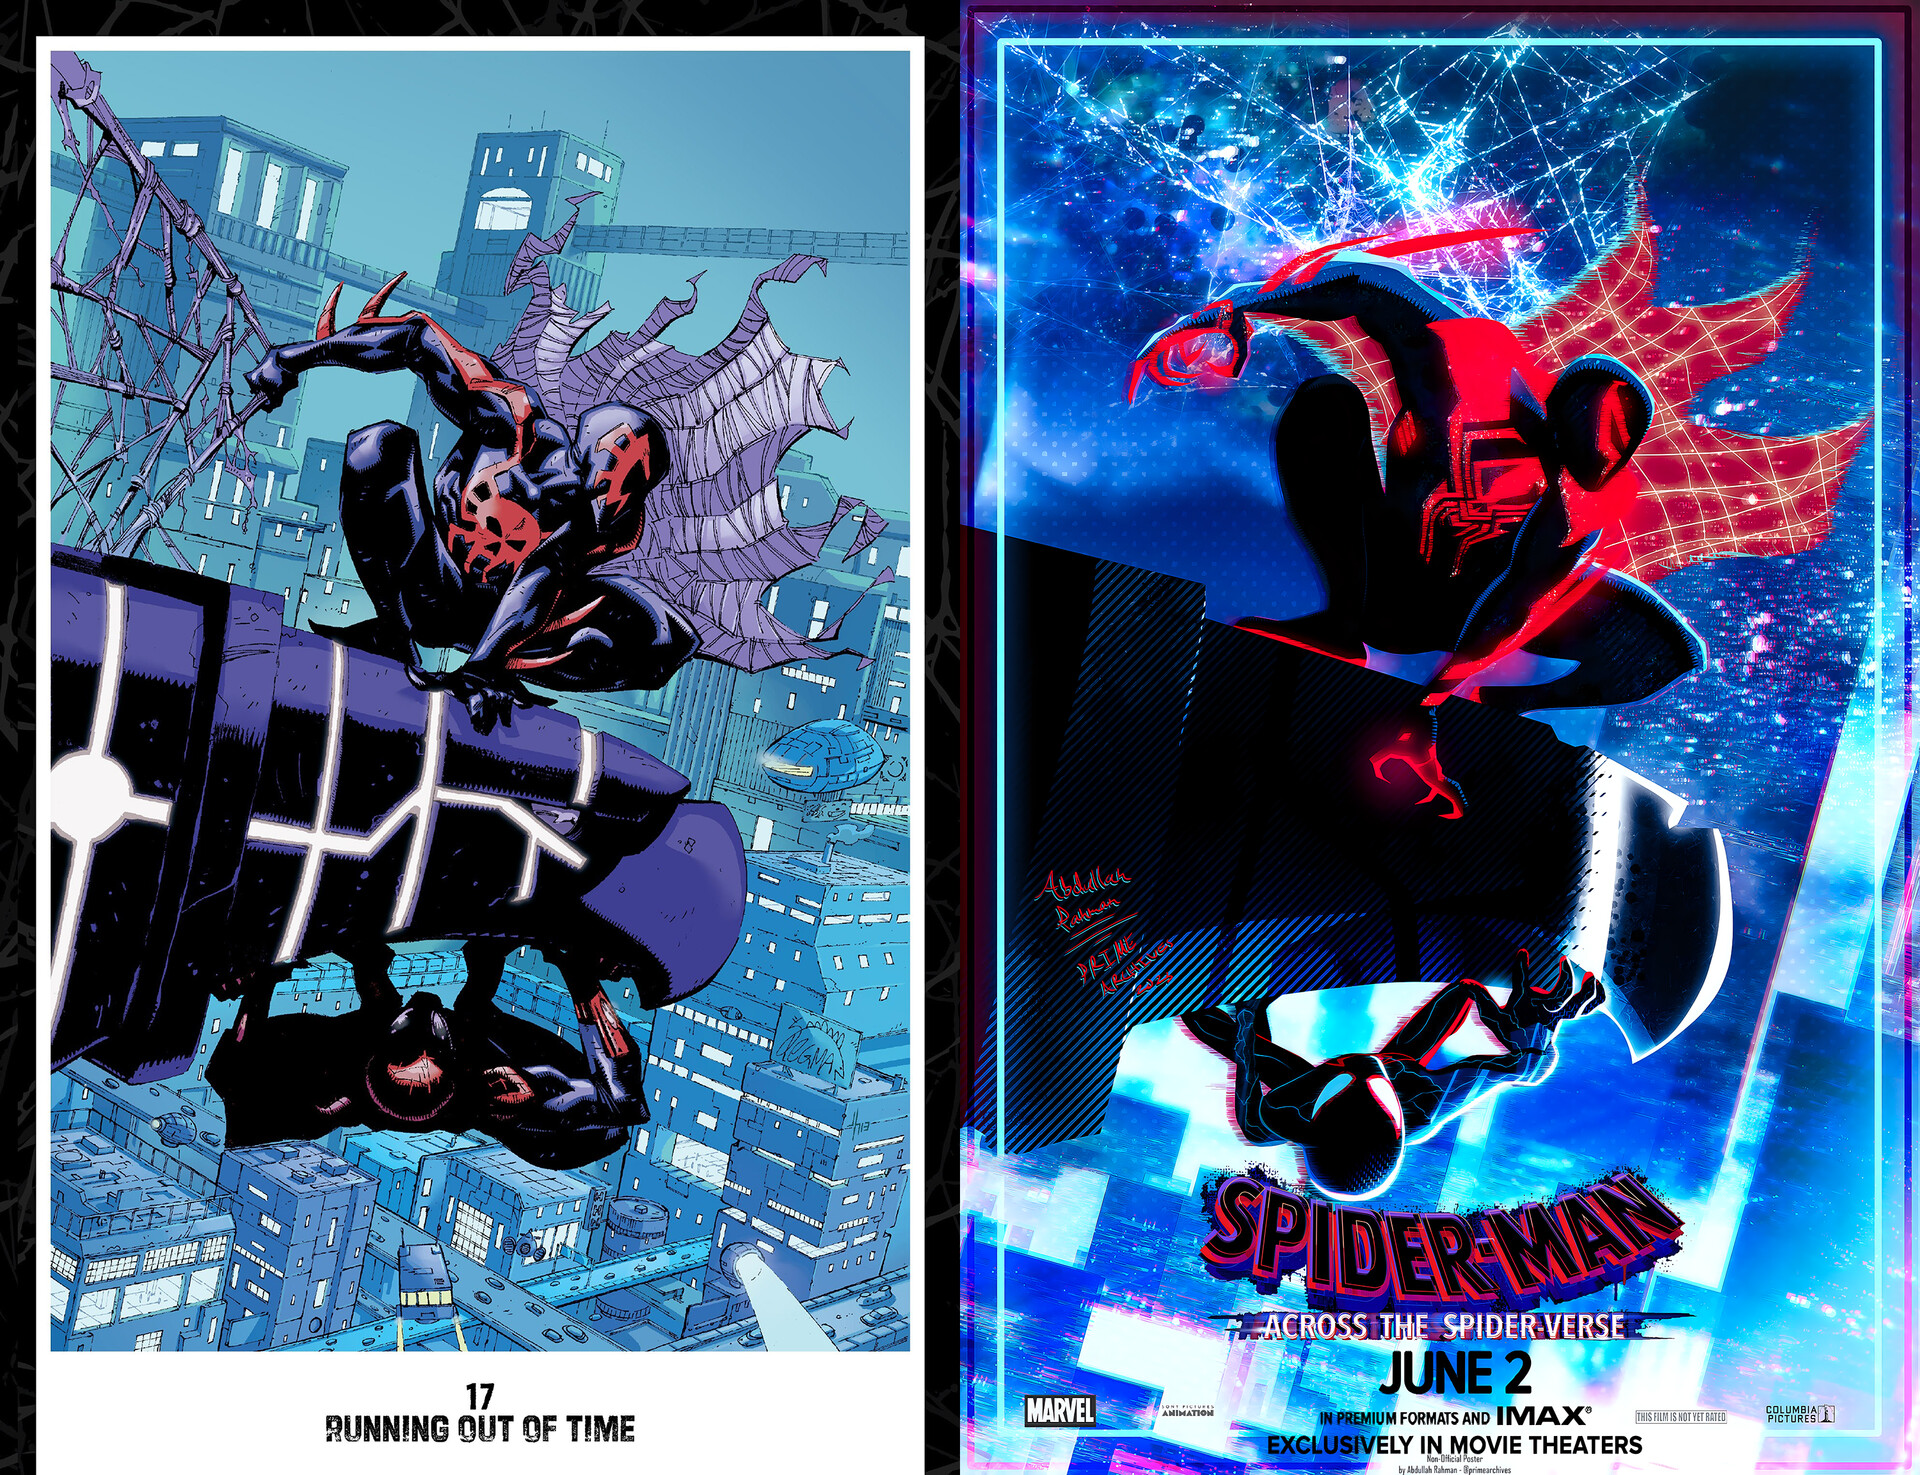 Fan made poster for Spider-Man Across the Spider-Verse illustrated